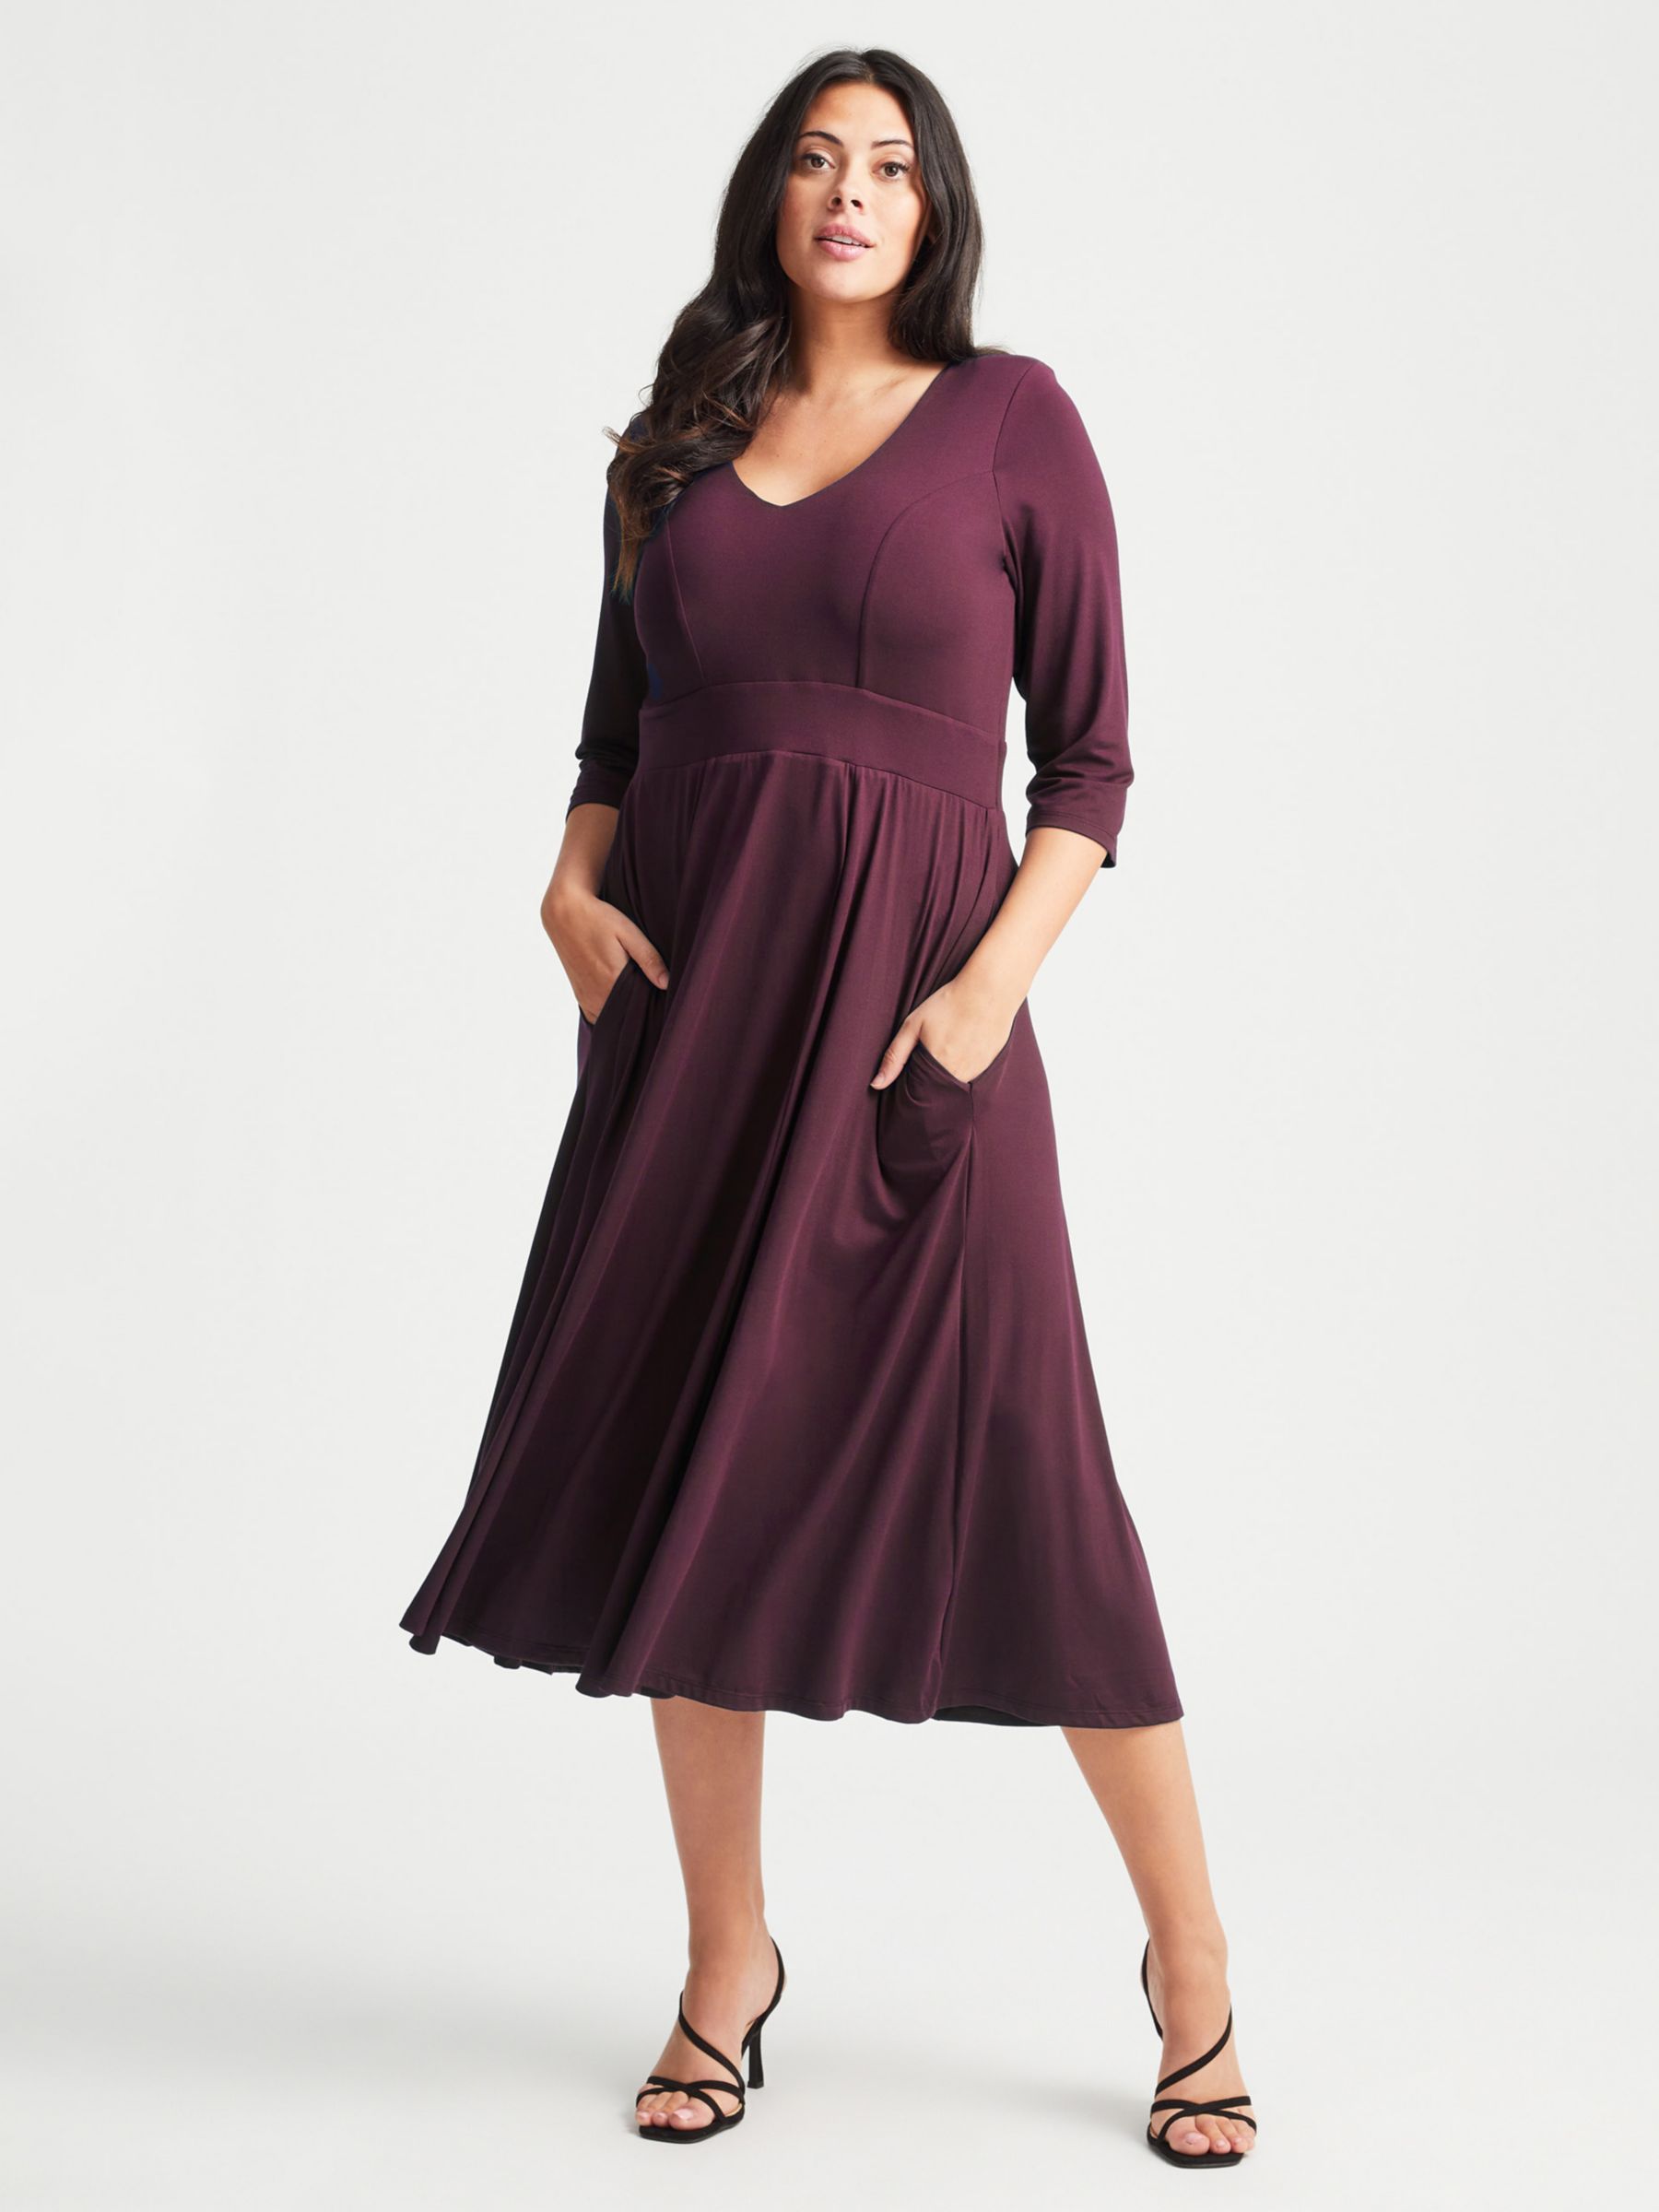 Scarlett & Jo V Neck Fit and Flare Mid Dress, Wine at John Lewis & Partners